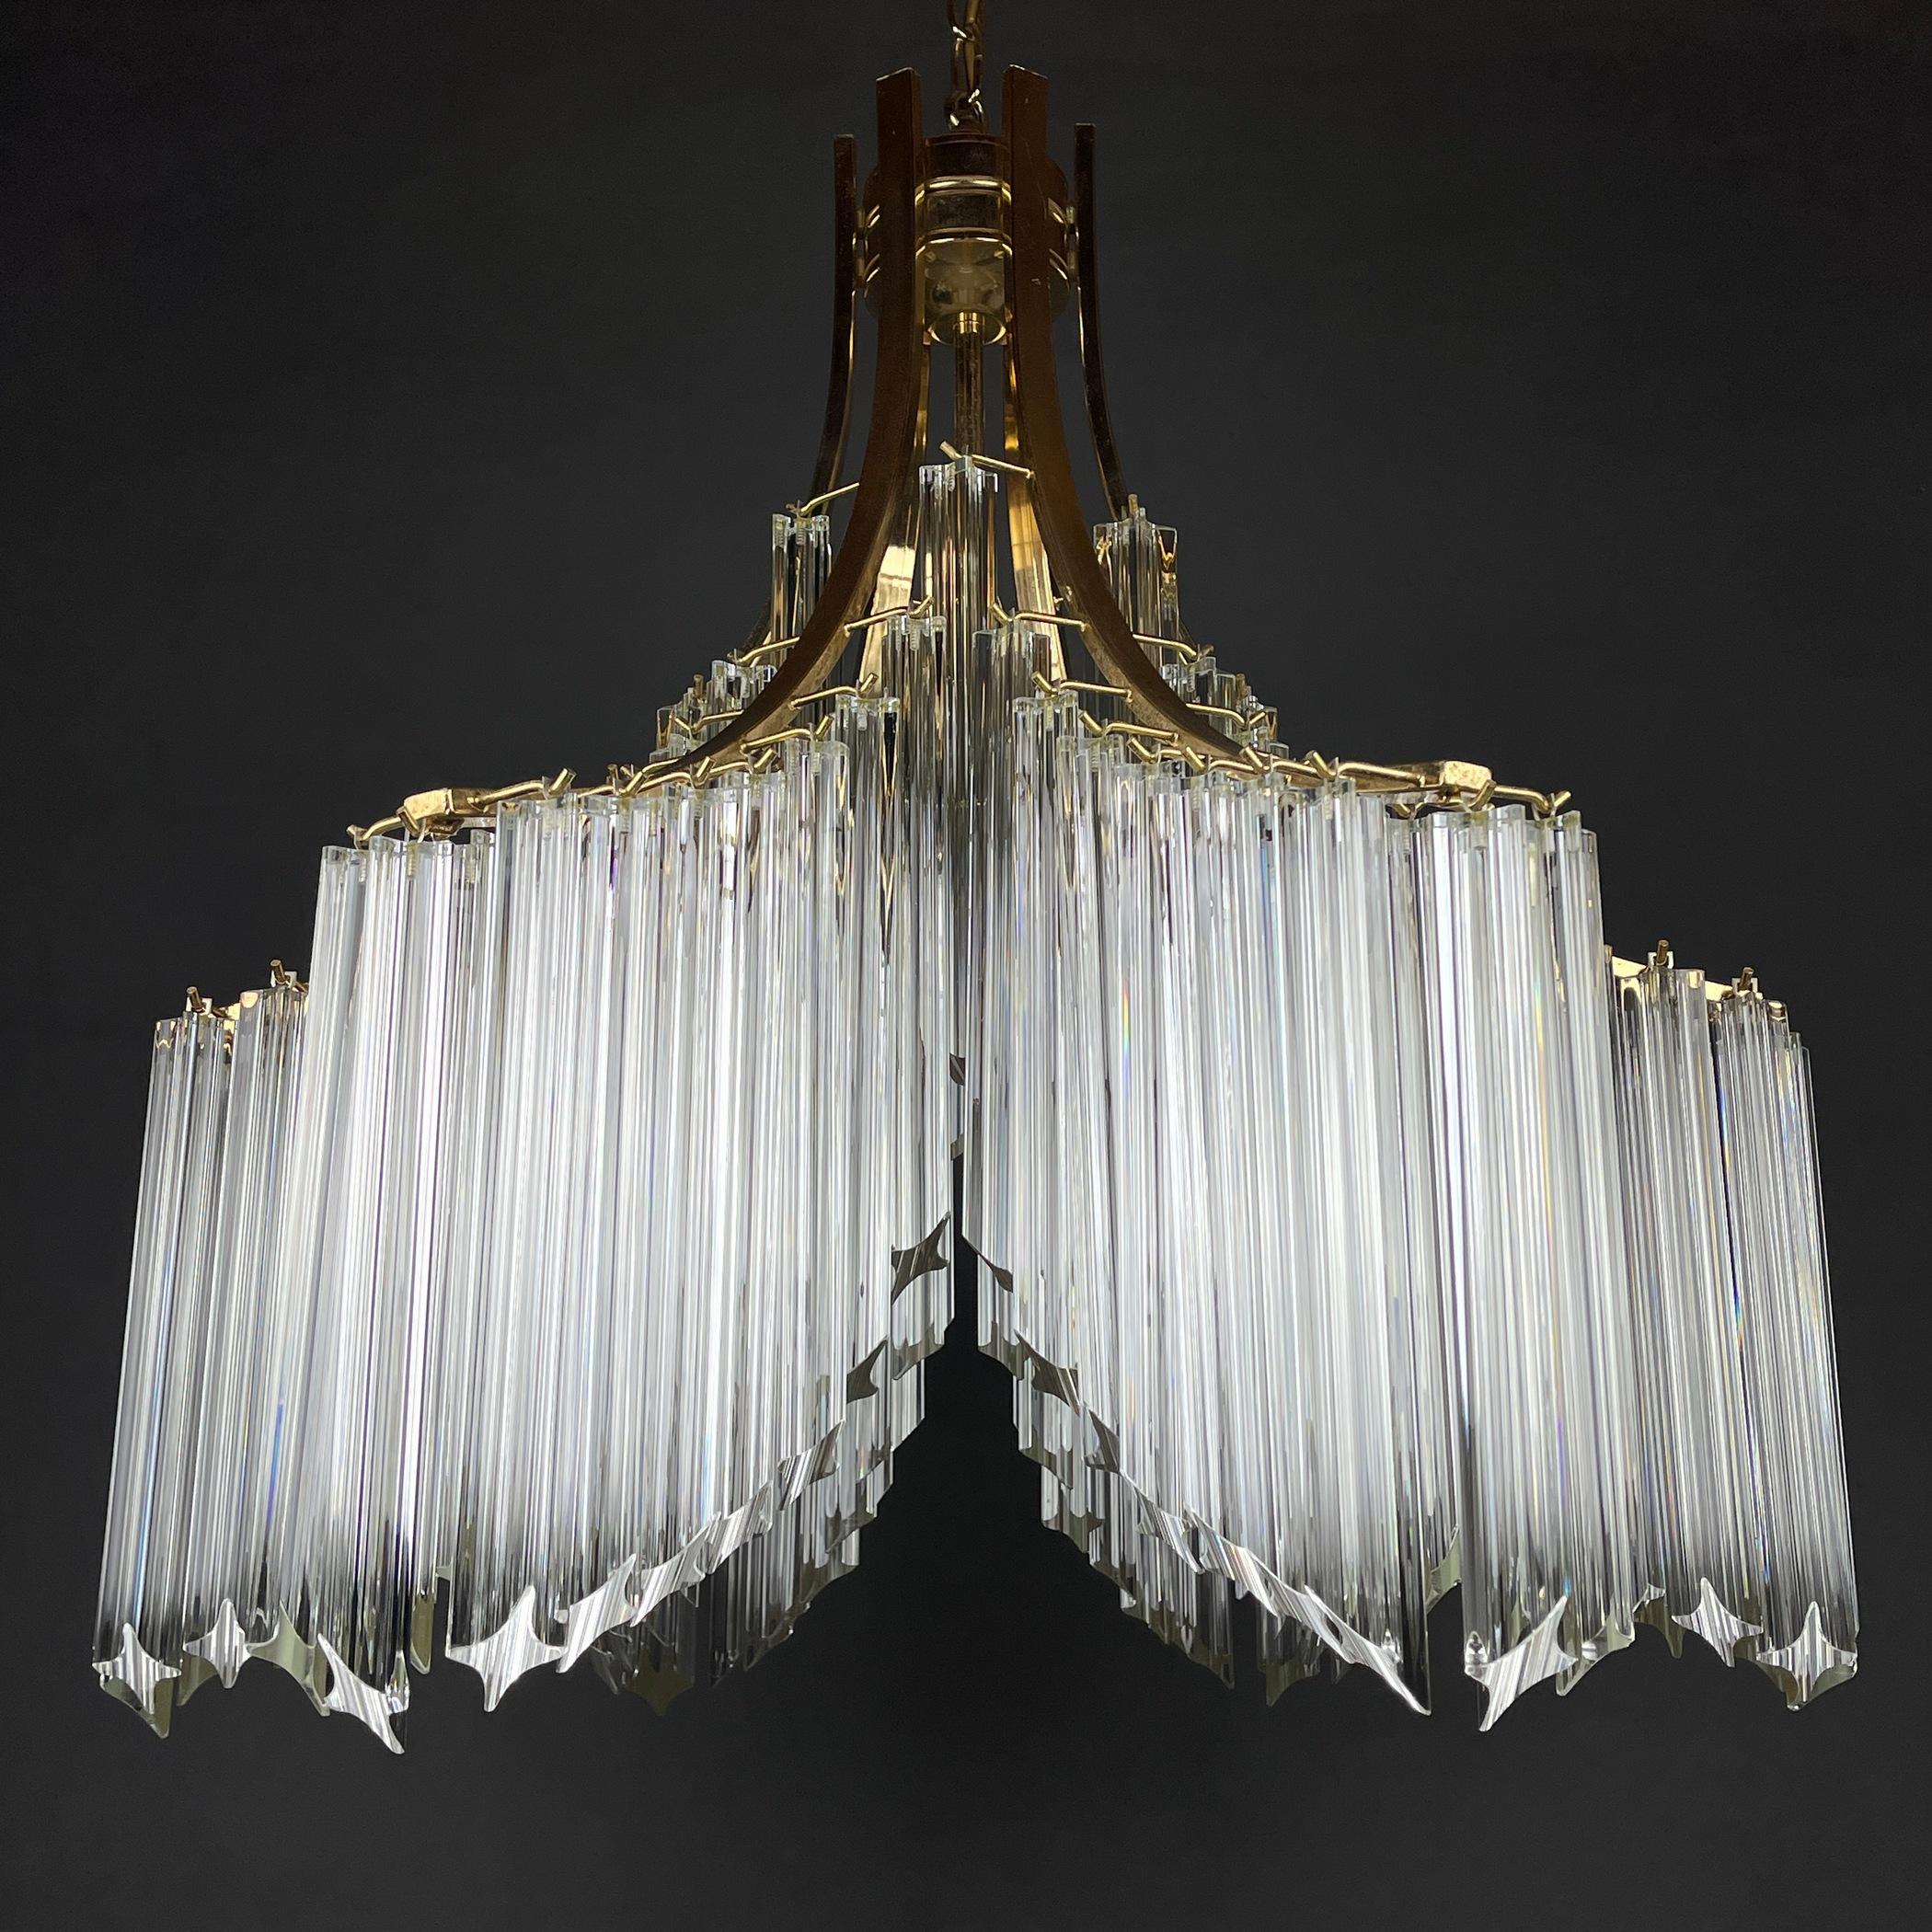 Stunning cascade chandelier made of 96 Murano glass transparent crystals by Venini. Made in Italy in the 1970s. Venini & Co. played a leading role in the revival of Italy’s high-end glass industry, pairing innovative modernist designers with the